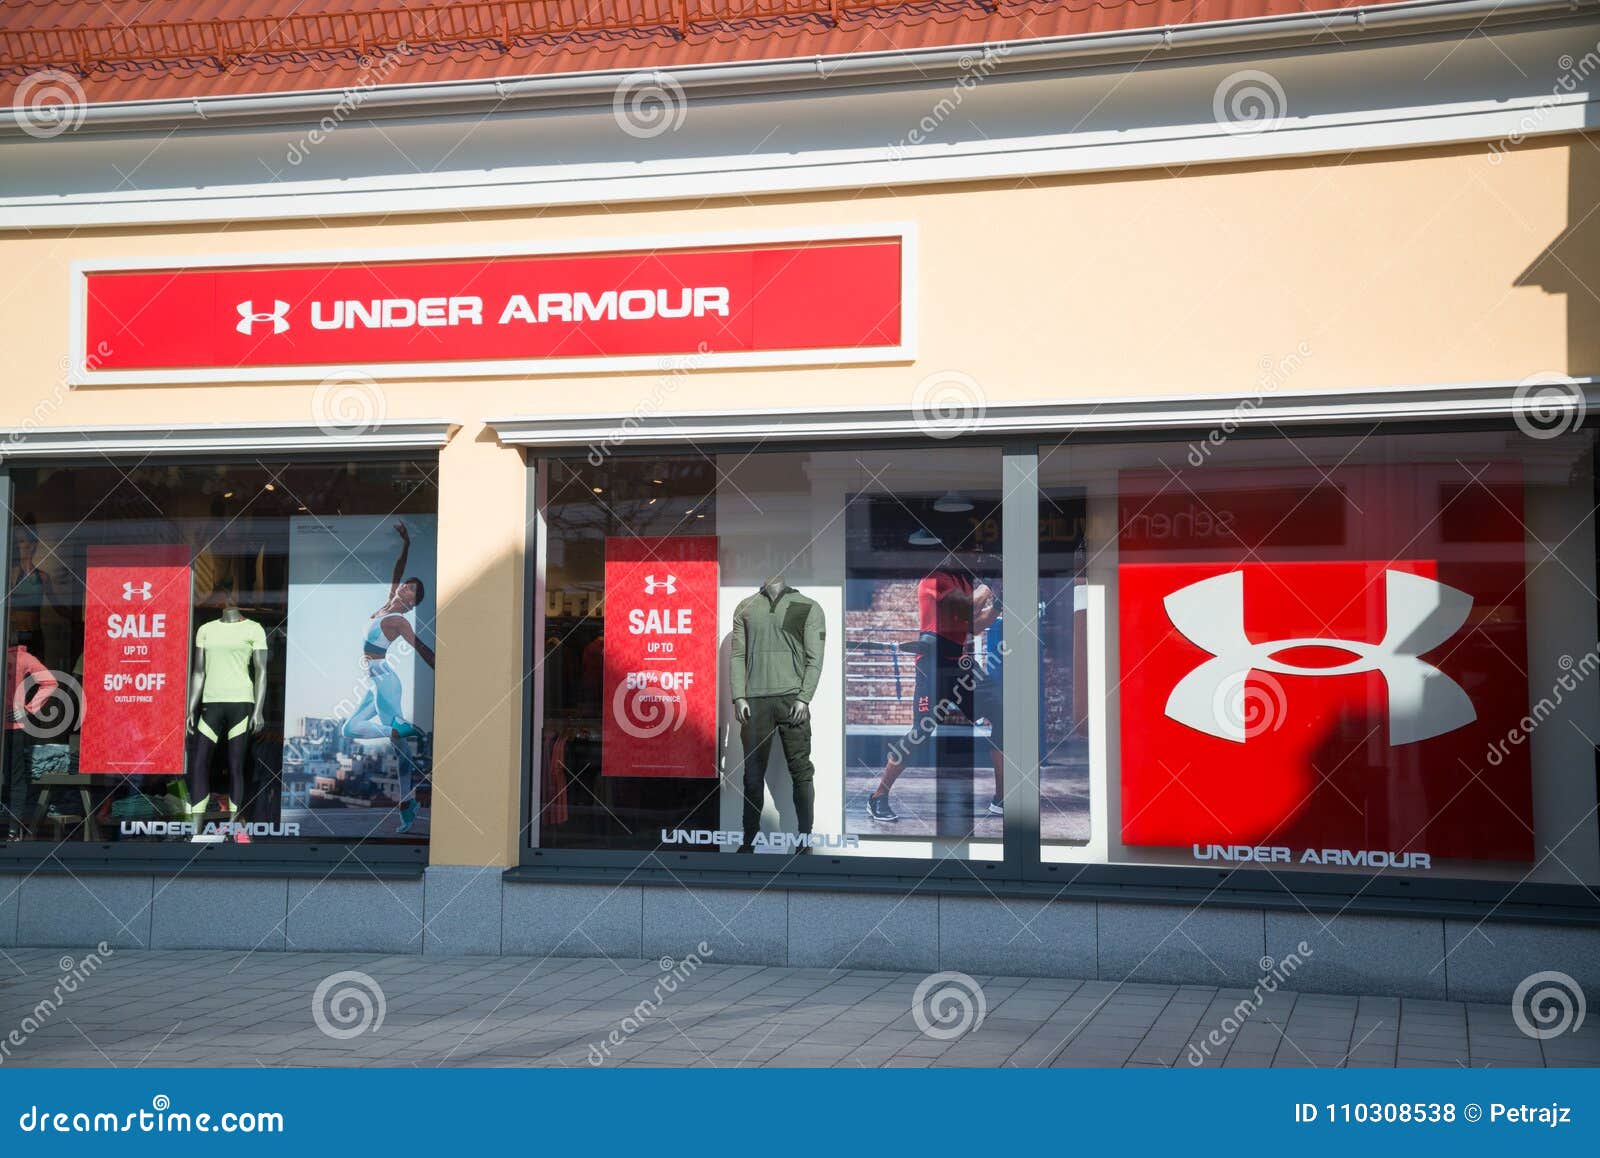 stores that sell under armour apparel